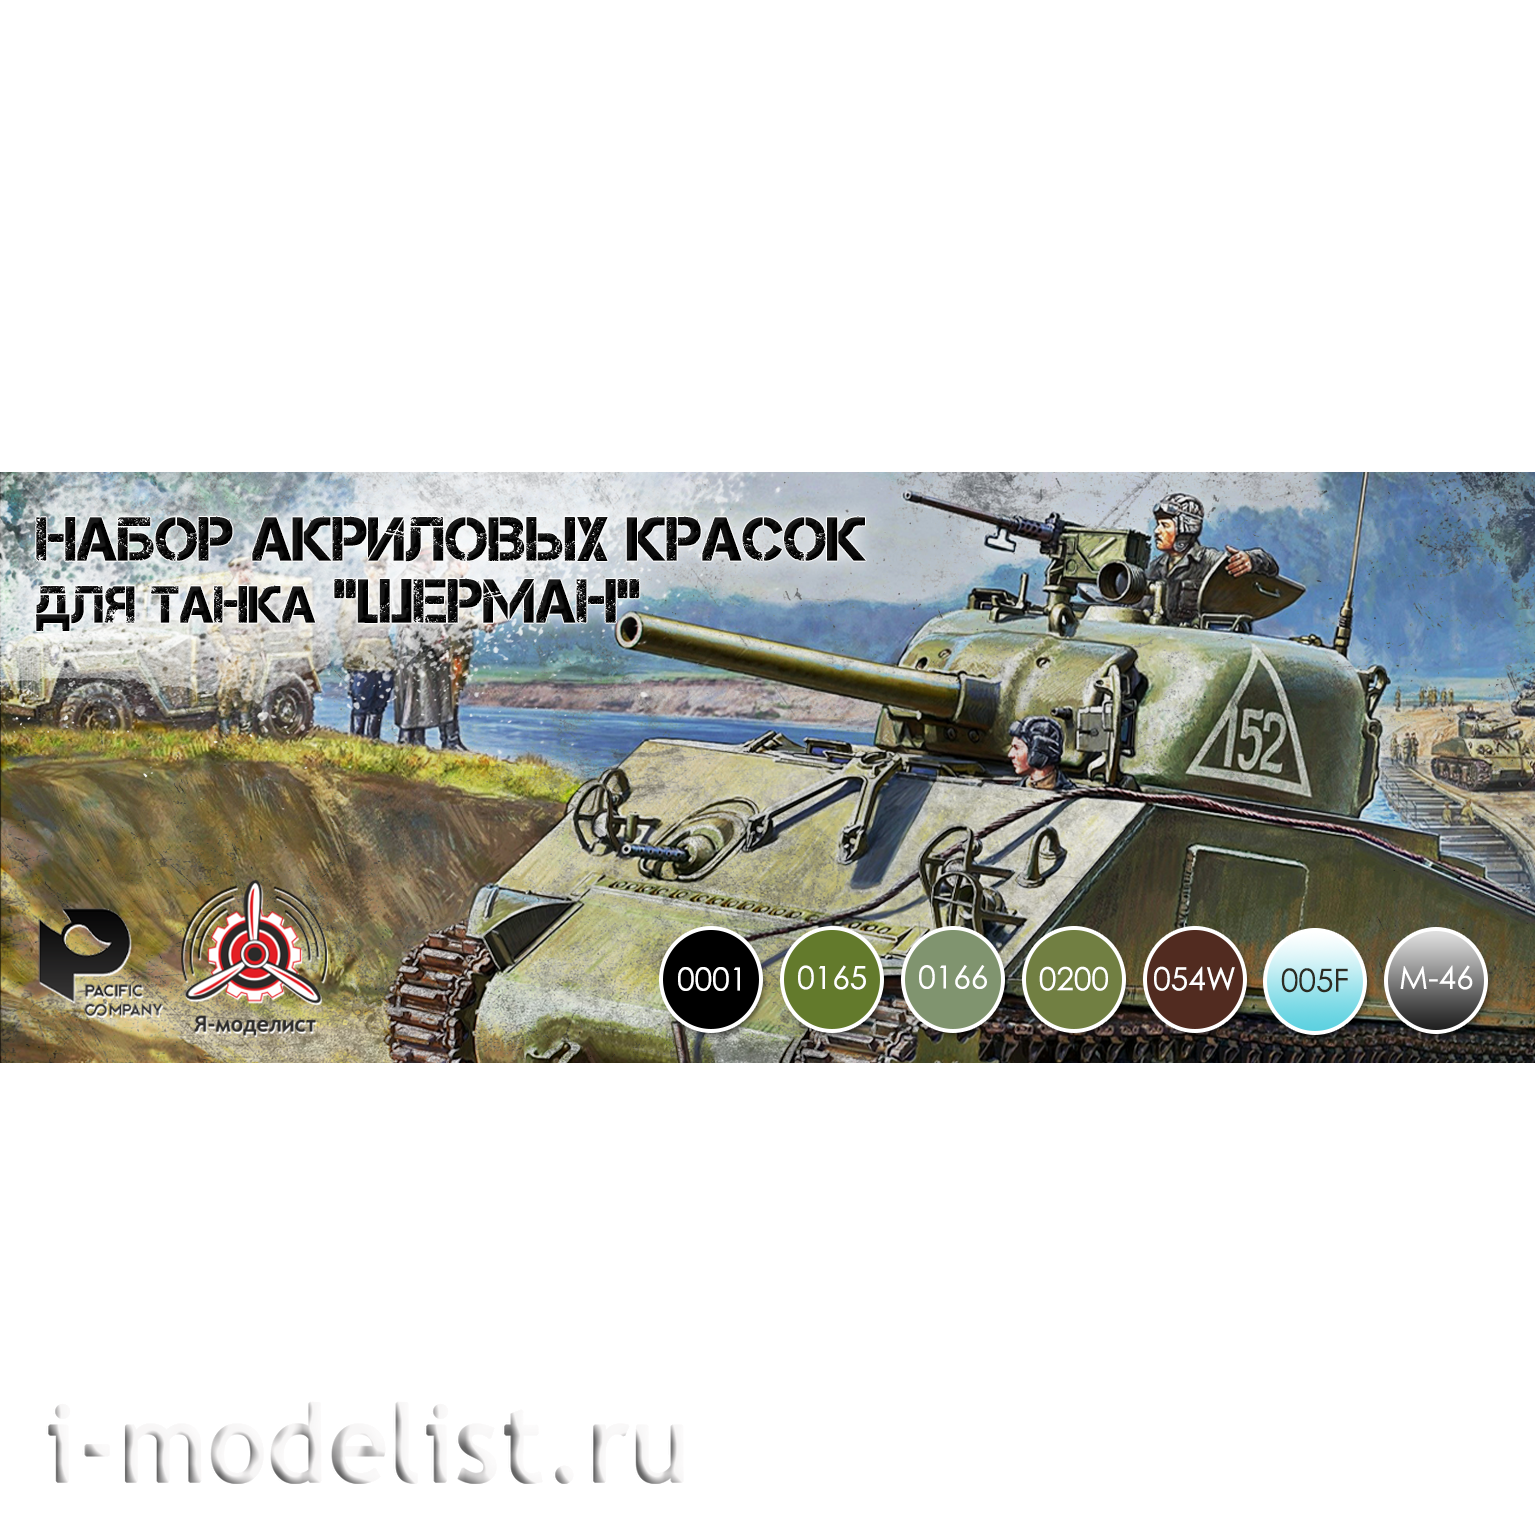 3509 Pacific88 the Set of colors for the American medium tank 